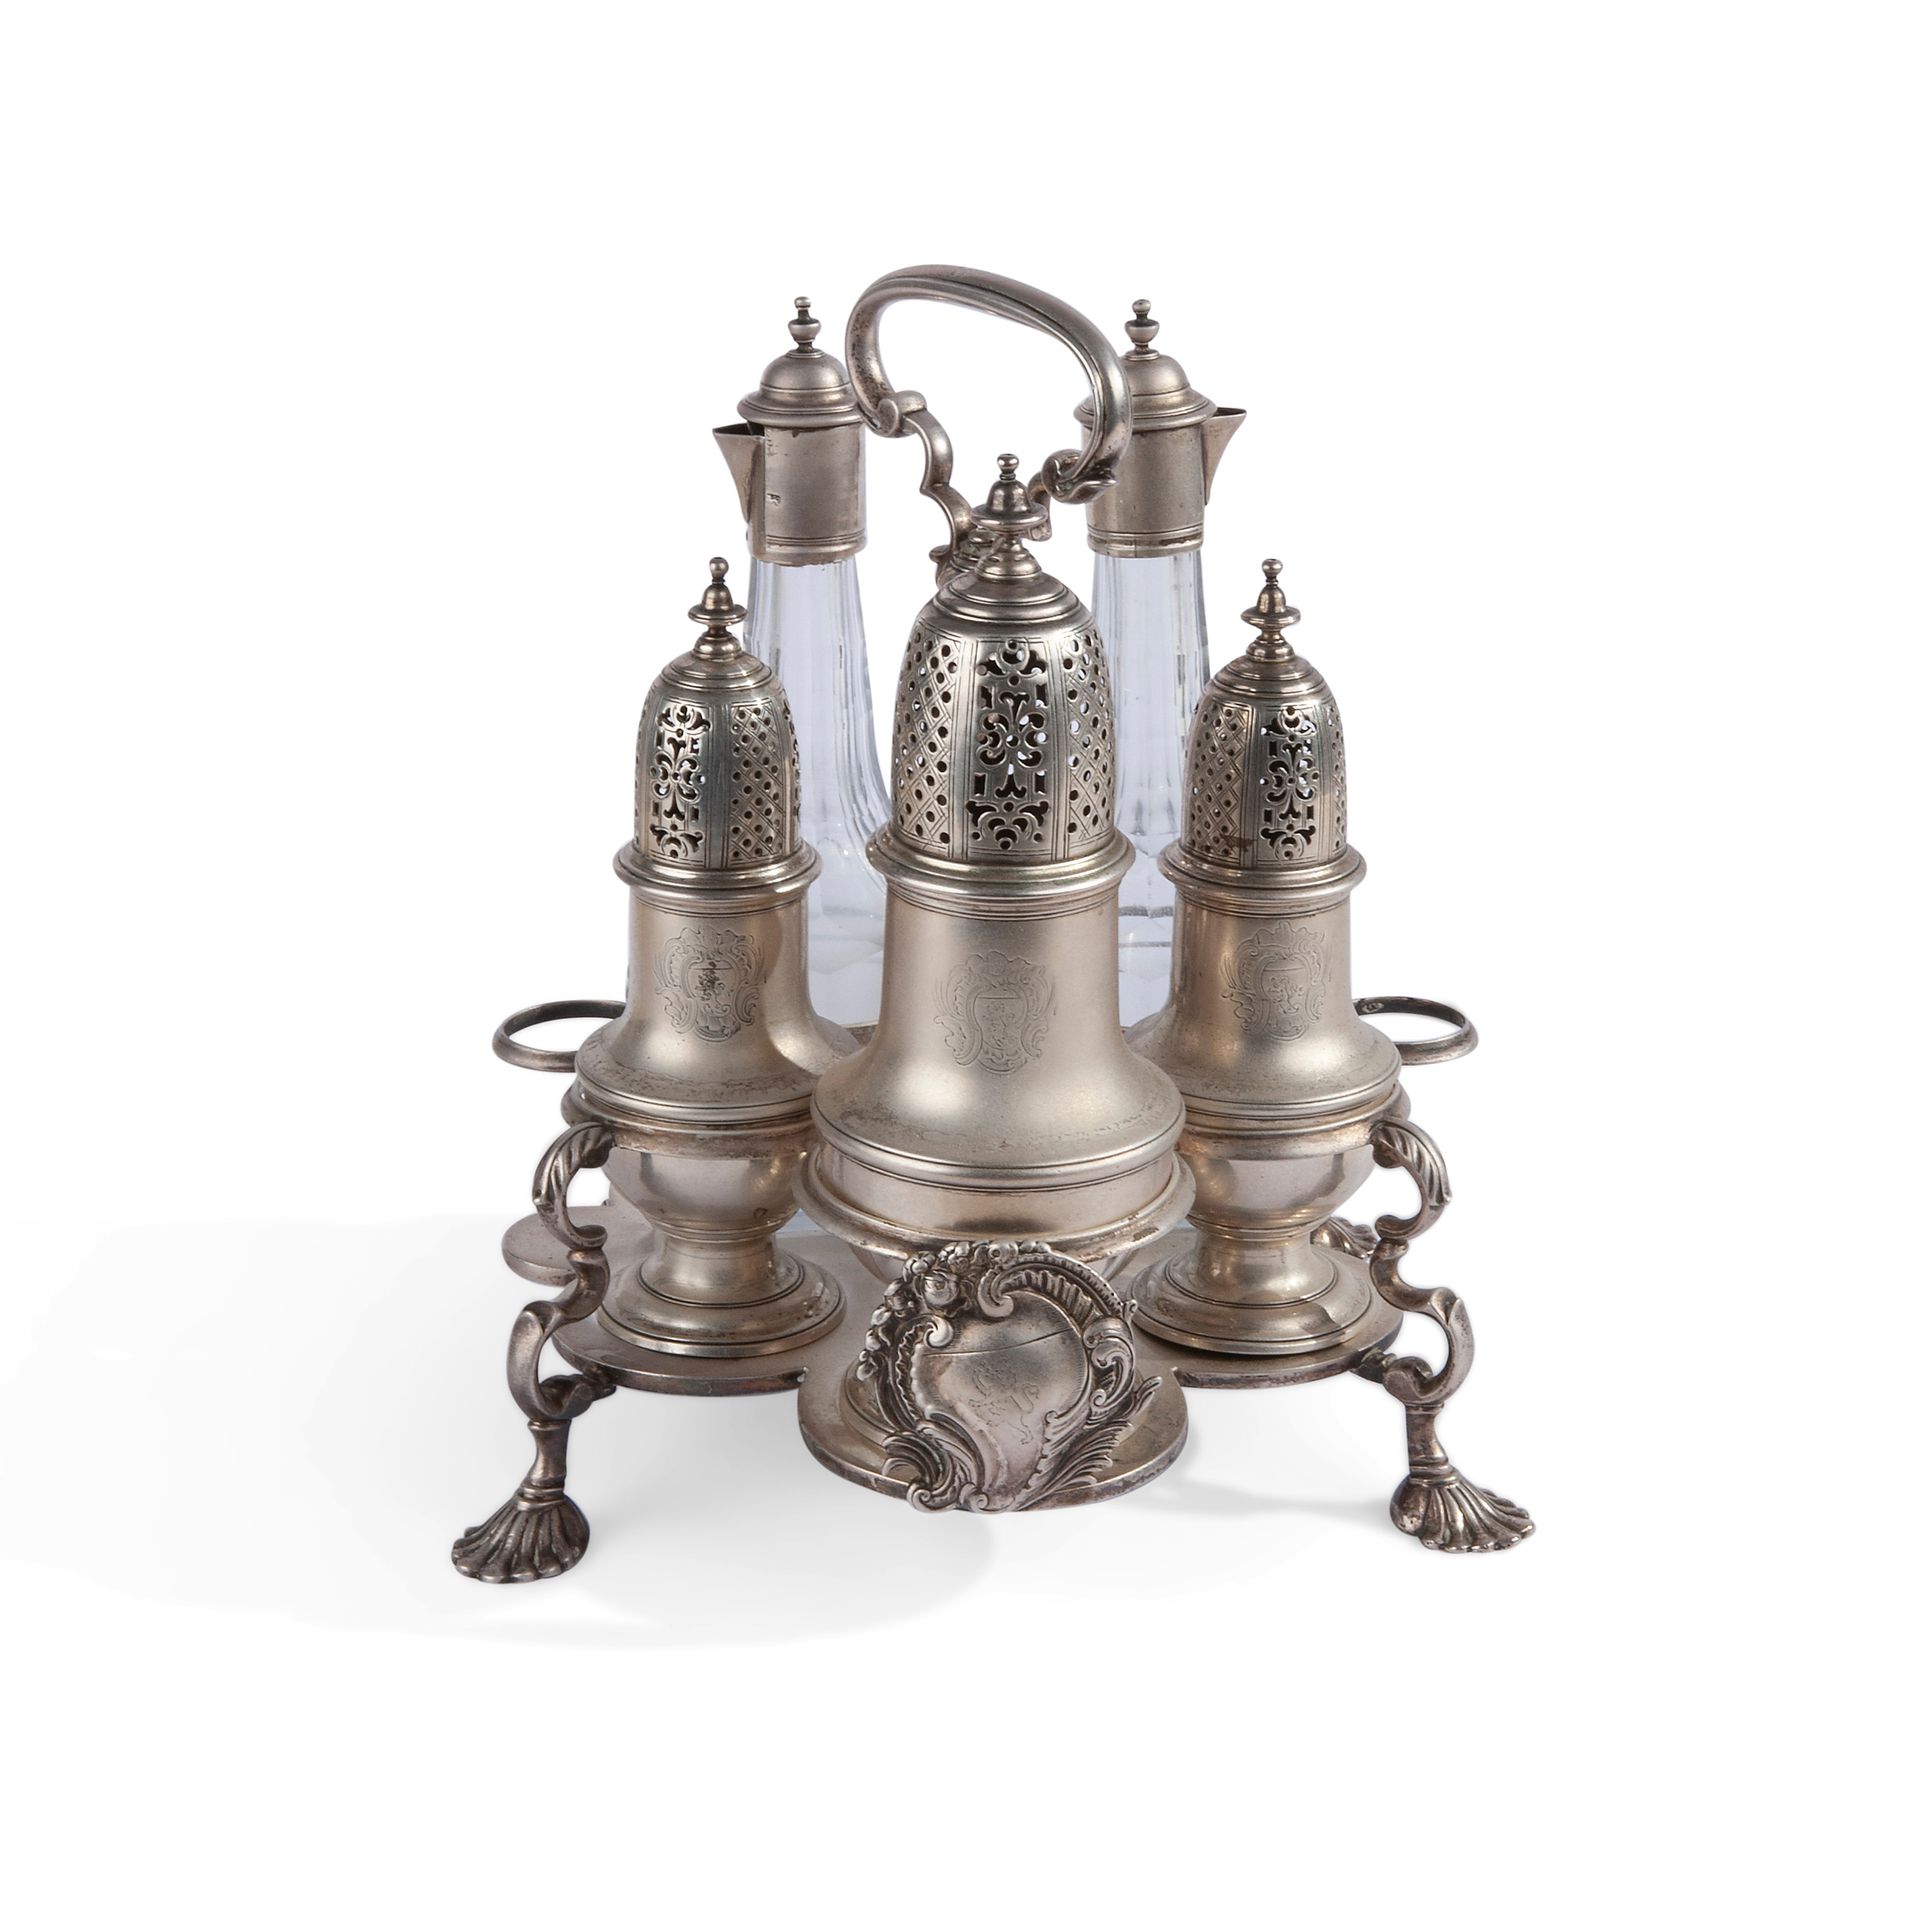 Warwick cruet in silver and crystal, London 1750 Hallmarks from the master silve&hellip;